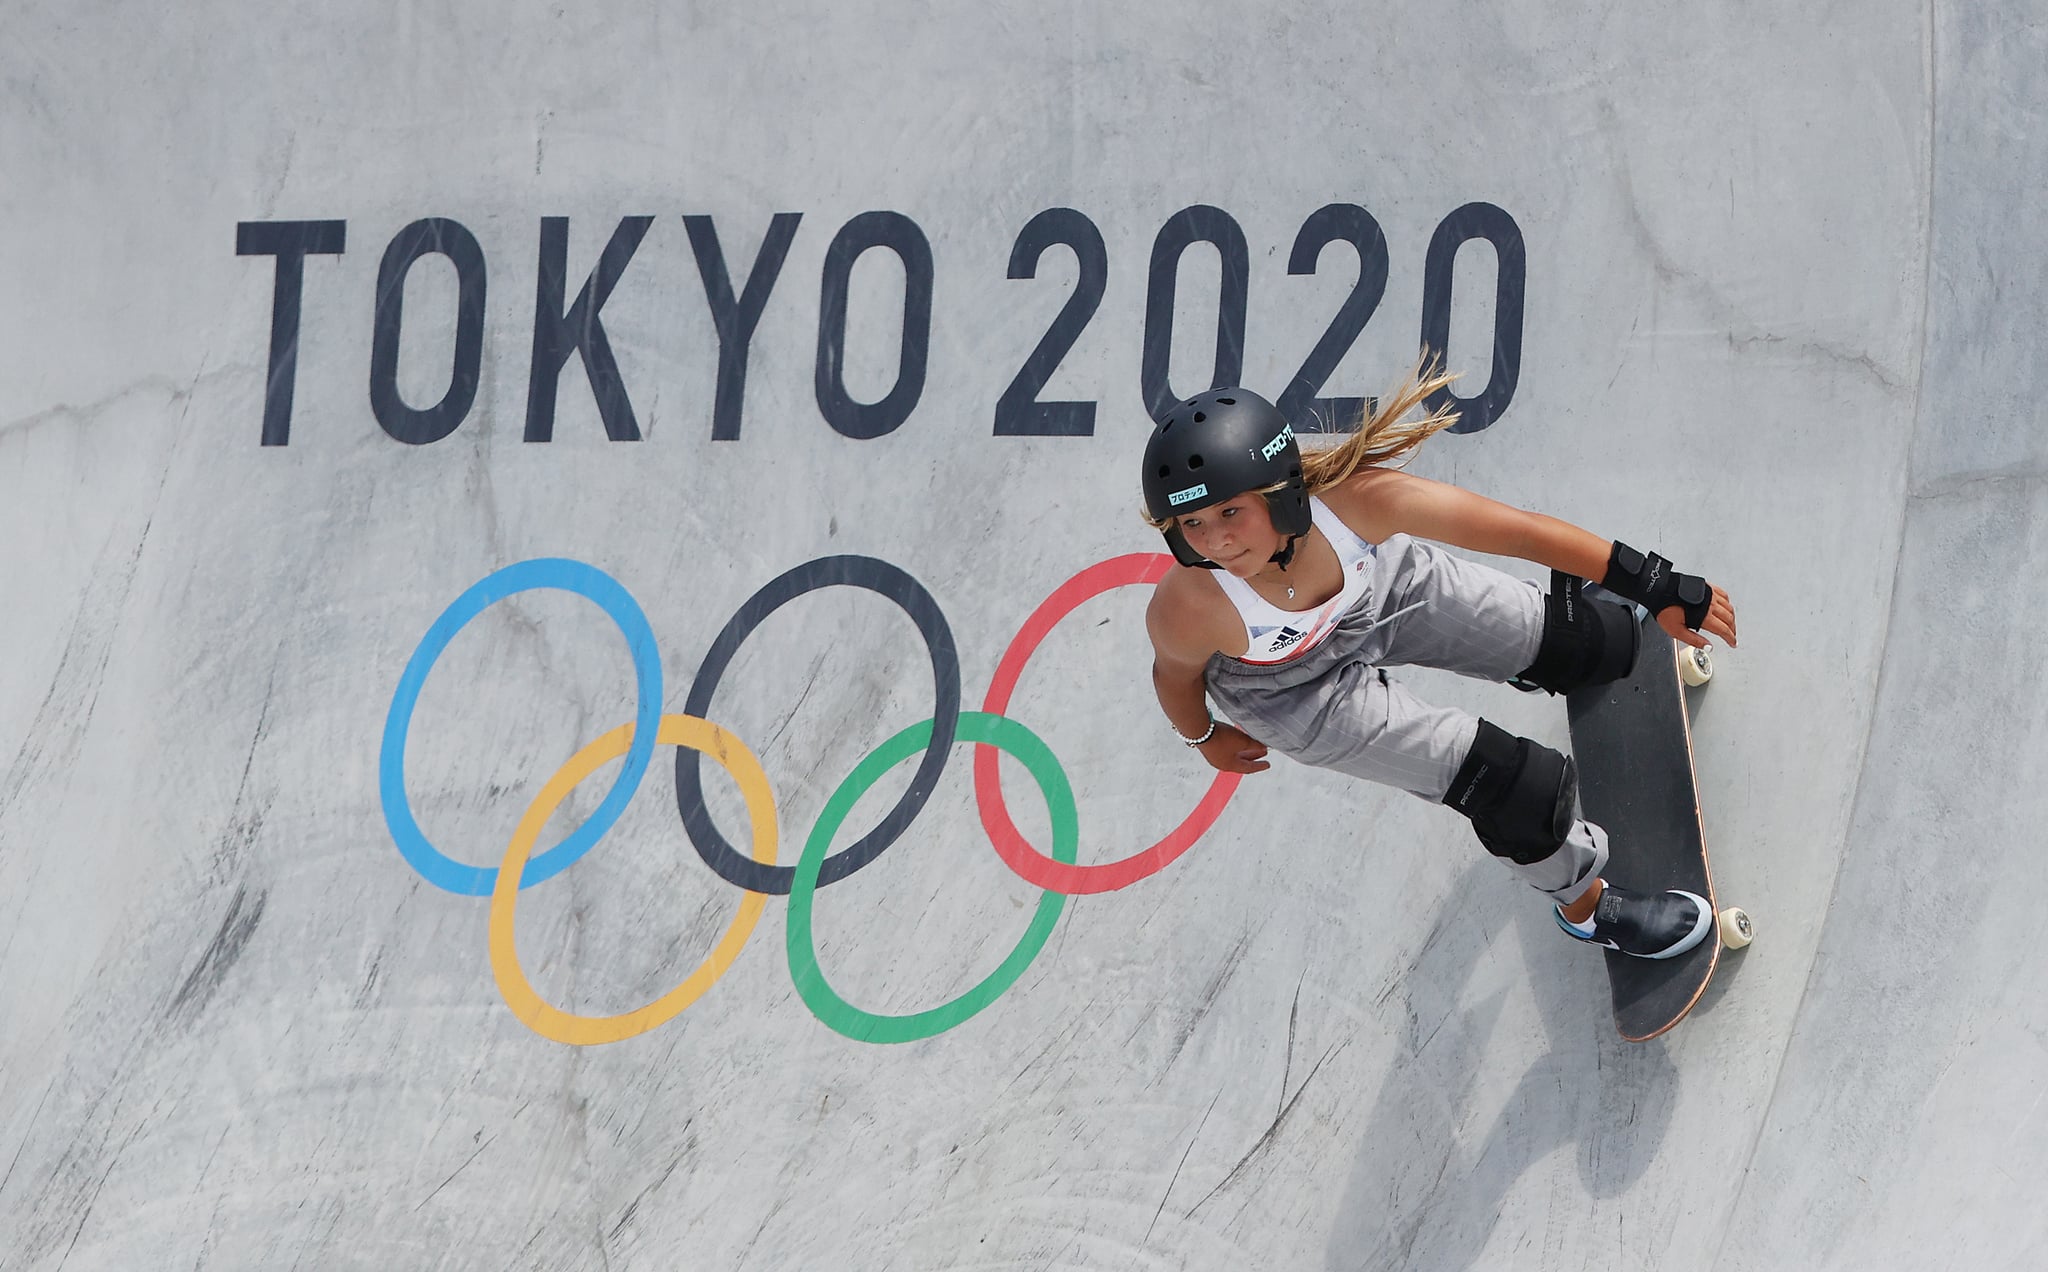 TOKYO, JAPAN - AUGUST 04: Sky Brown of Team Great Britain competes during the Women's Skateboarding Park Preliminary Heat on day twelve of the Tokyo 2020 Olympic Games at Ariake Urban Sports Park on August 04, 2021 in Tokyo, Japan.